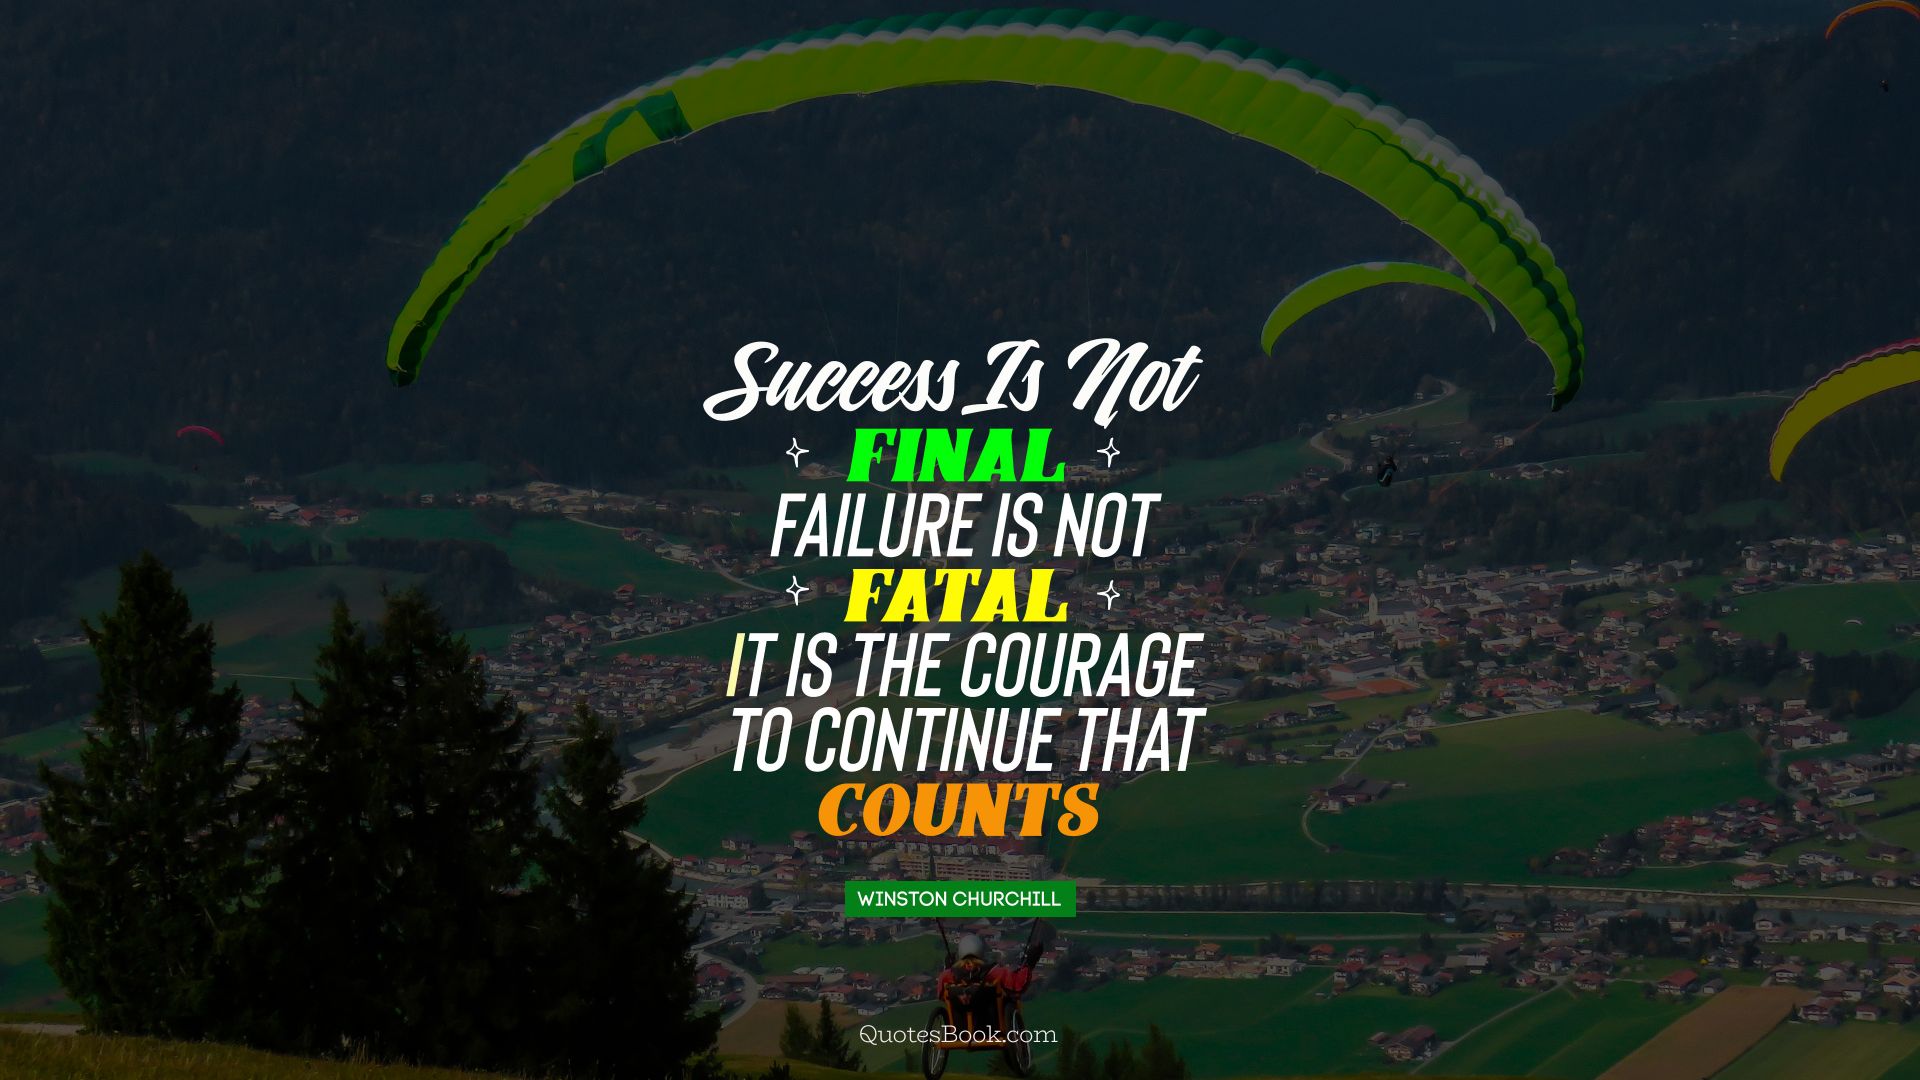 Success is not final, failure is not fatal it is the courage to continue that counts. - Quote by Winston Churchile